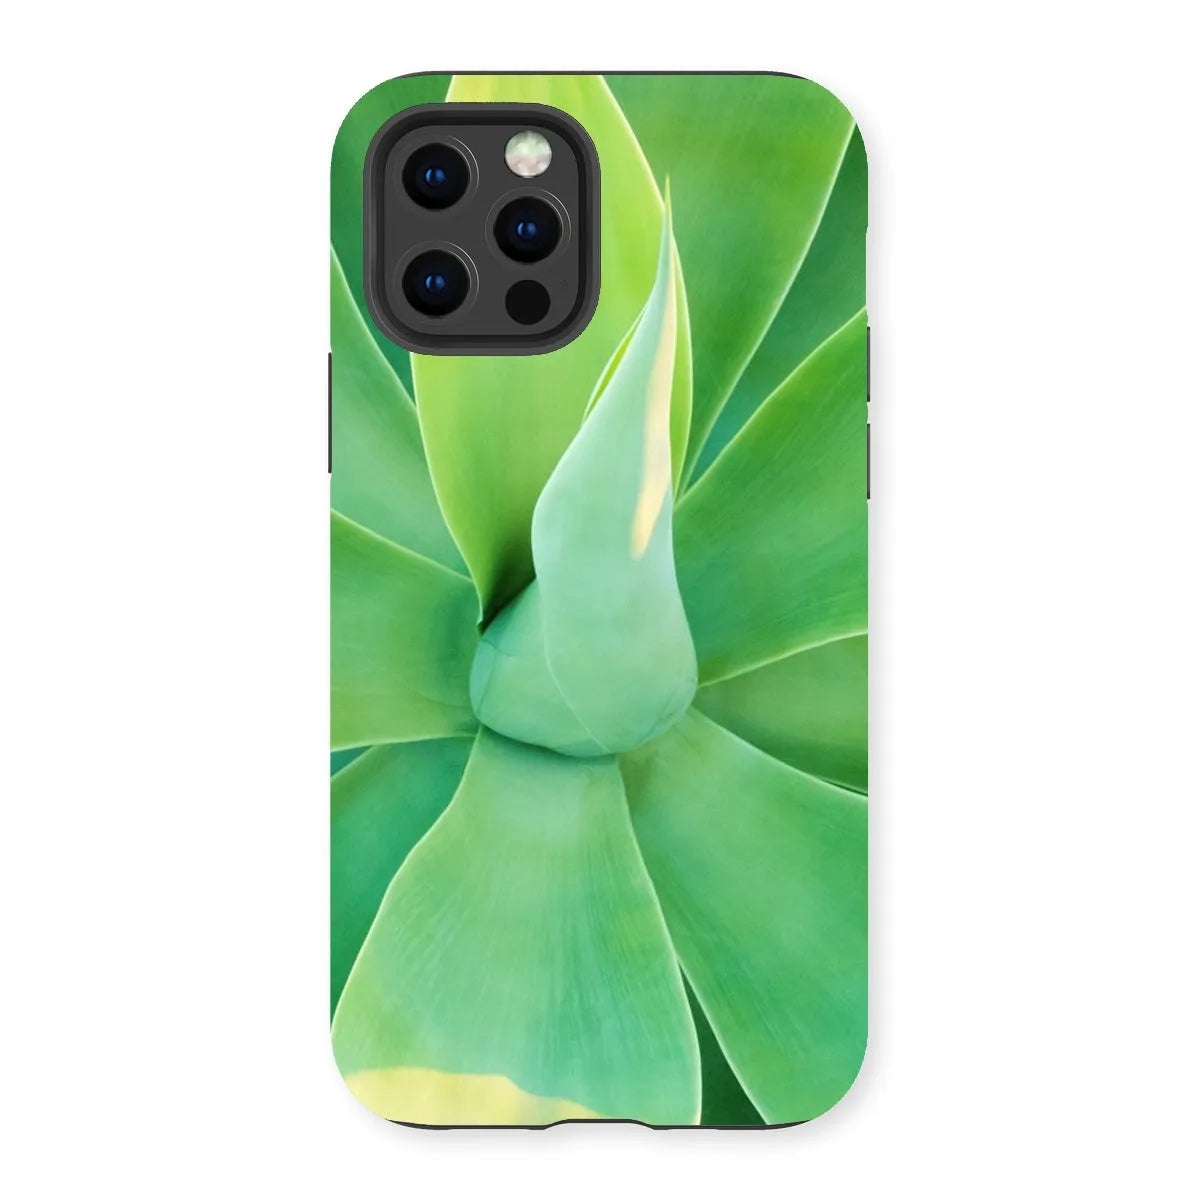 In Bloom Too Tough Phone Case - Iphone 13 Pro / Matte - Mobile Phone Cases - Aesthetic Art